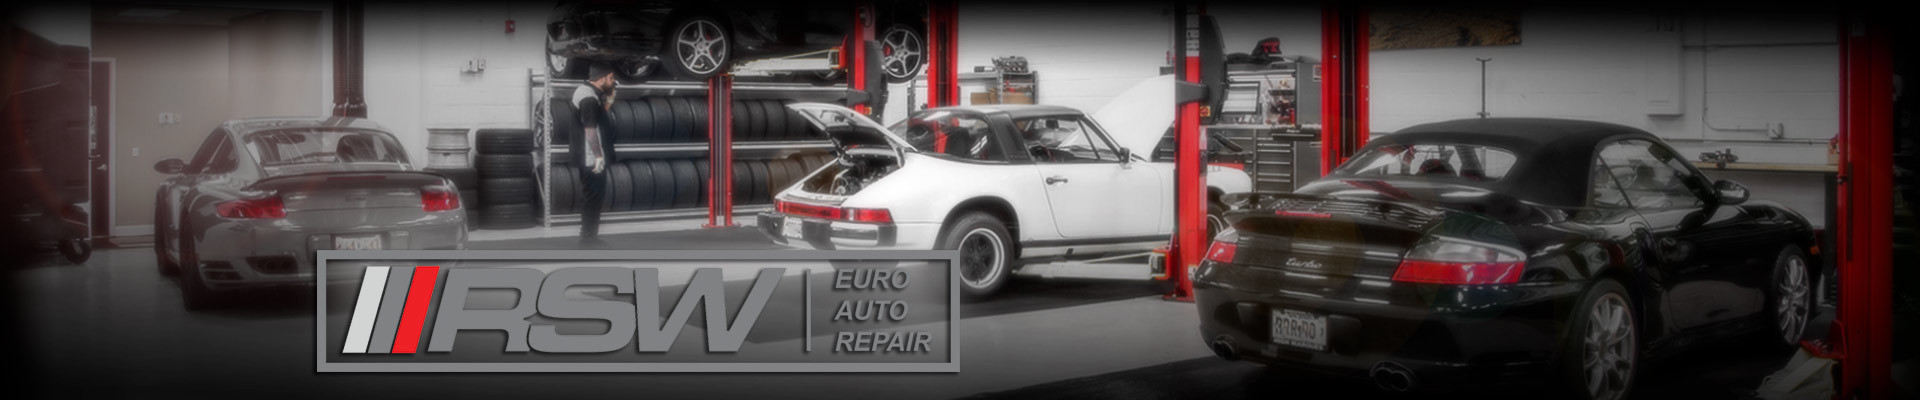 Porsche Repair in Green Brook, NJ by RSW Euro Auto Repair a leading Porsche repair shop in New Jersey specializing in Porsche repair, maintenance, performance tuning and service.